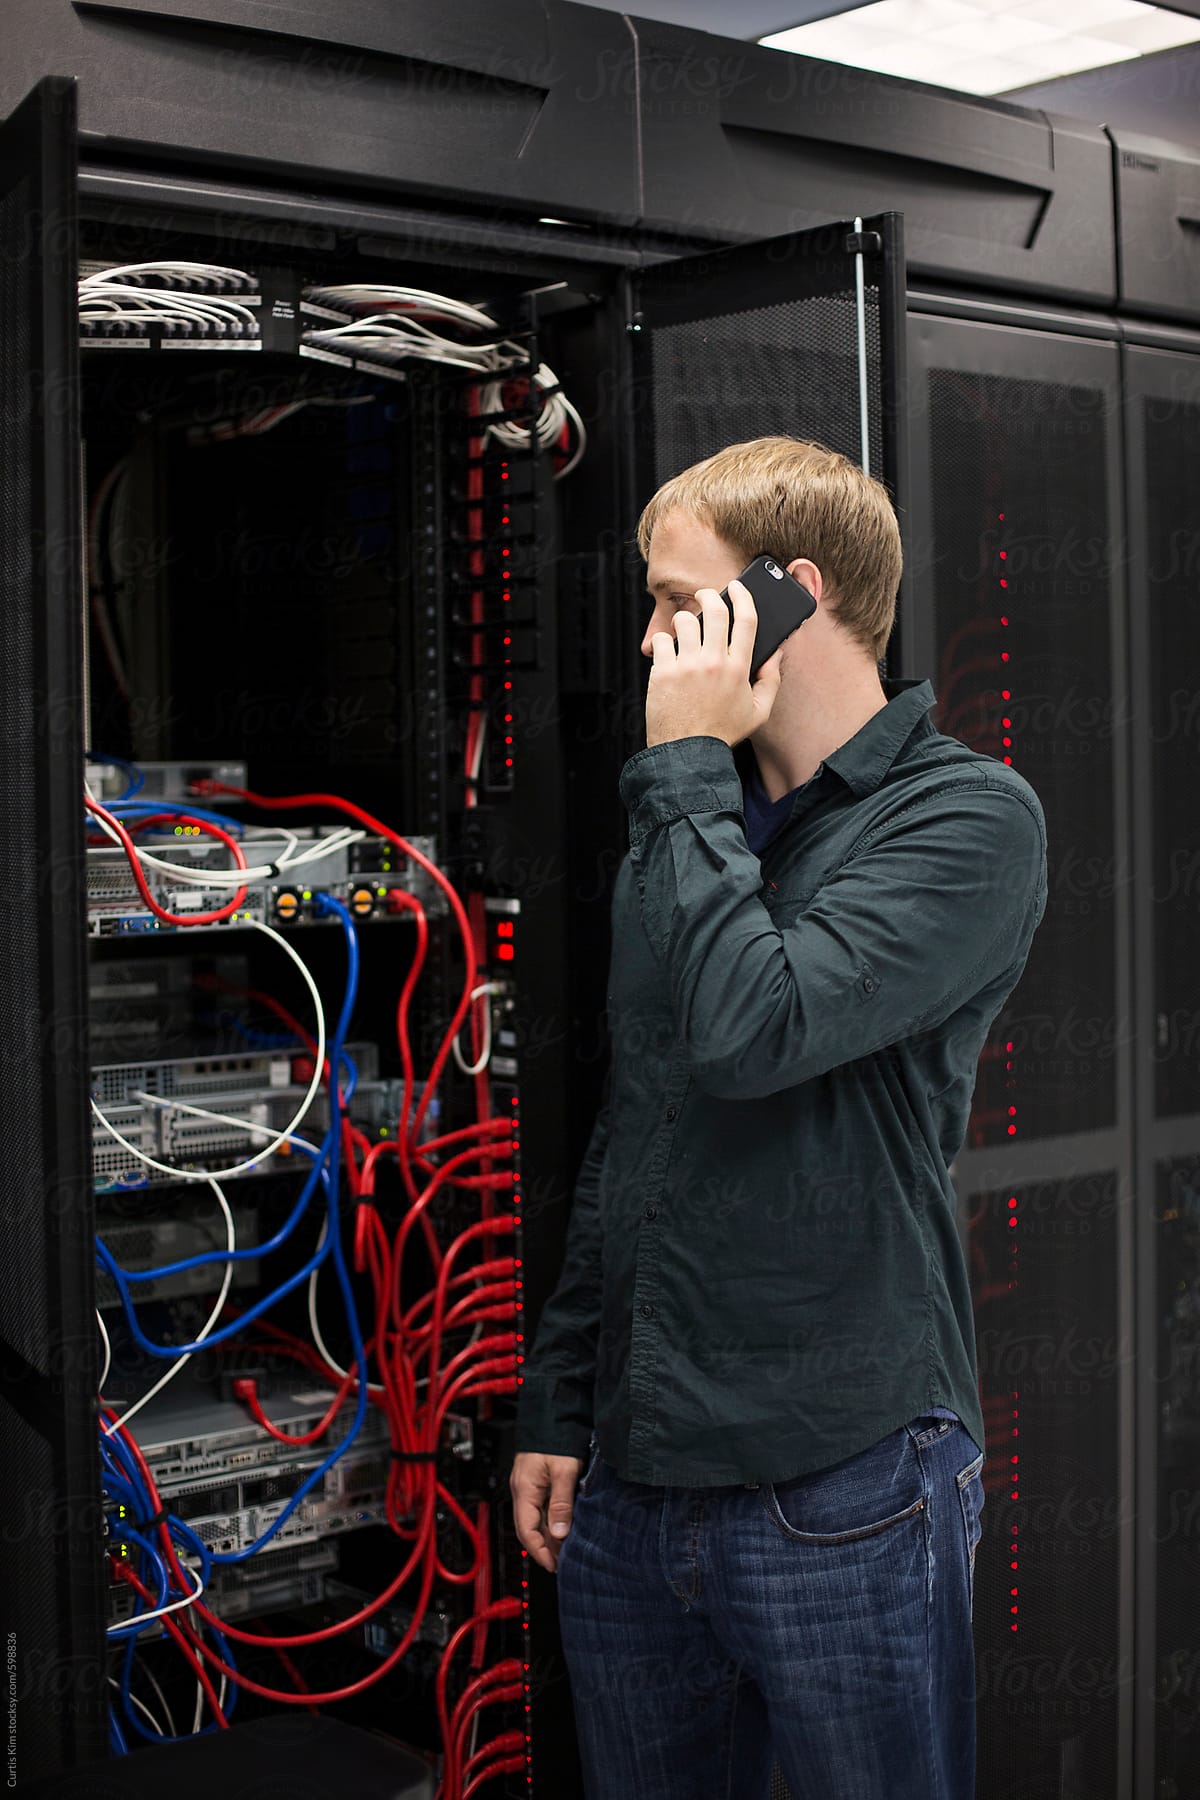 Computer programmer on the phone in server room